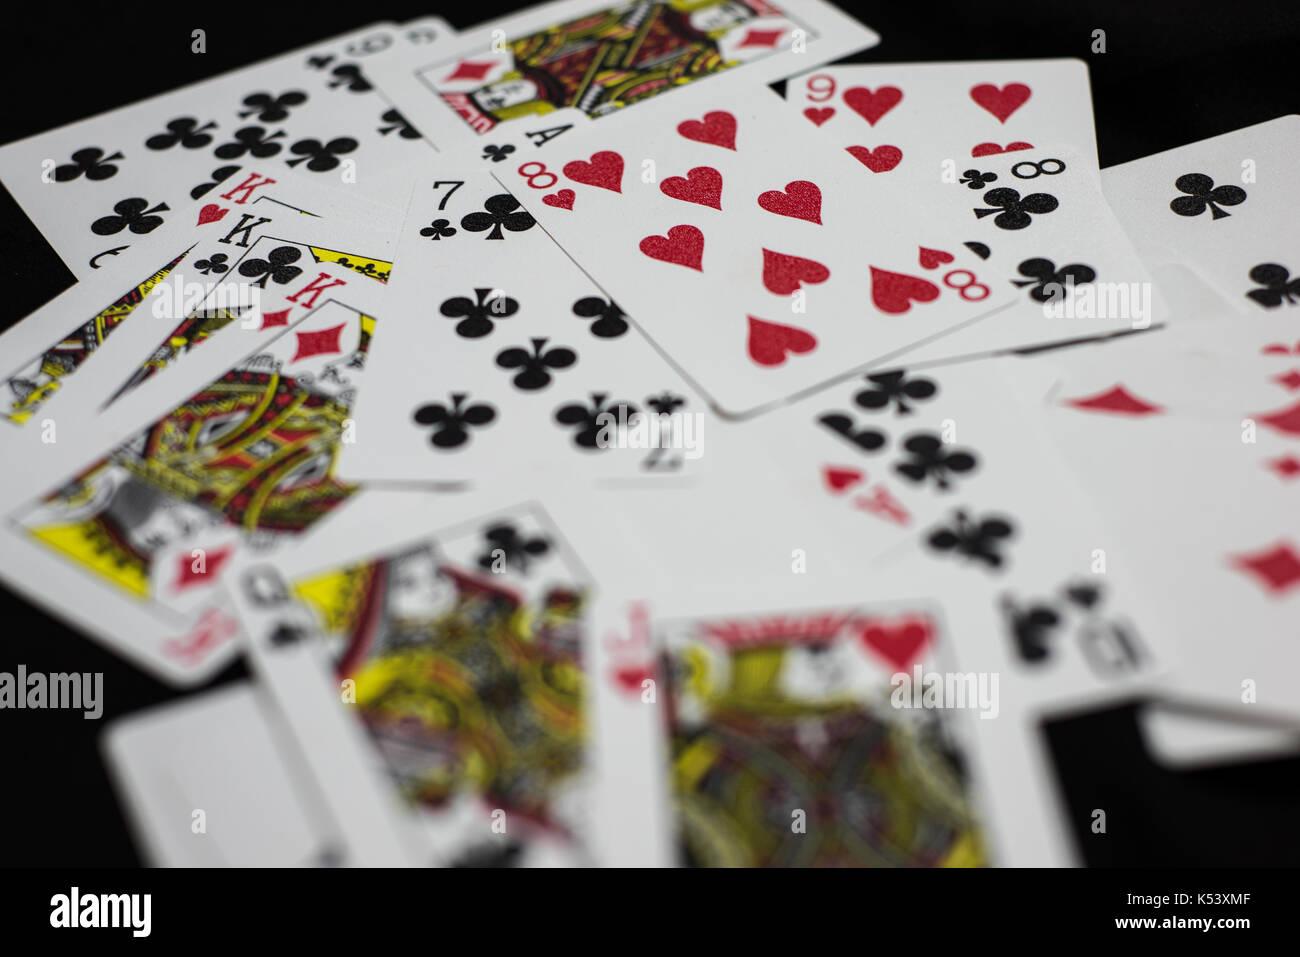 A deck of playing cards splattered over the table Stock Photo